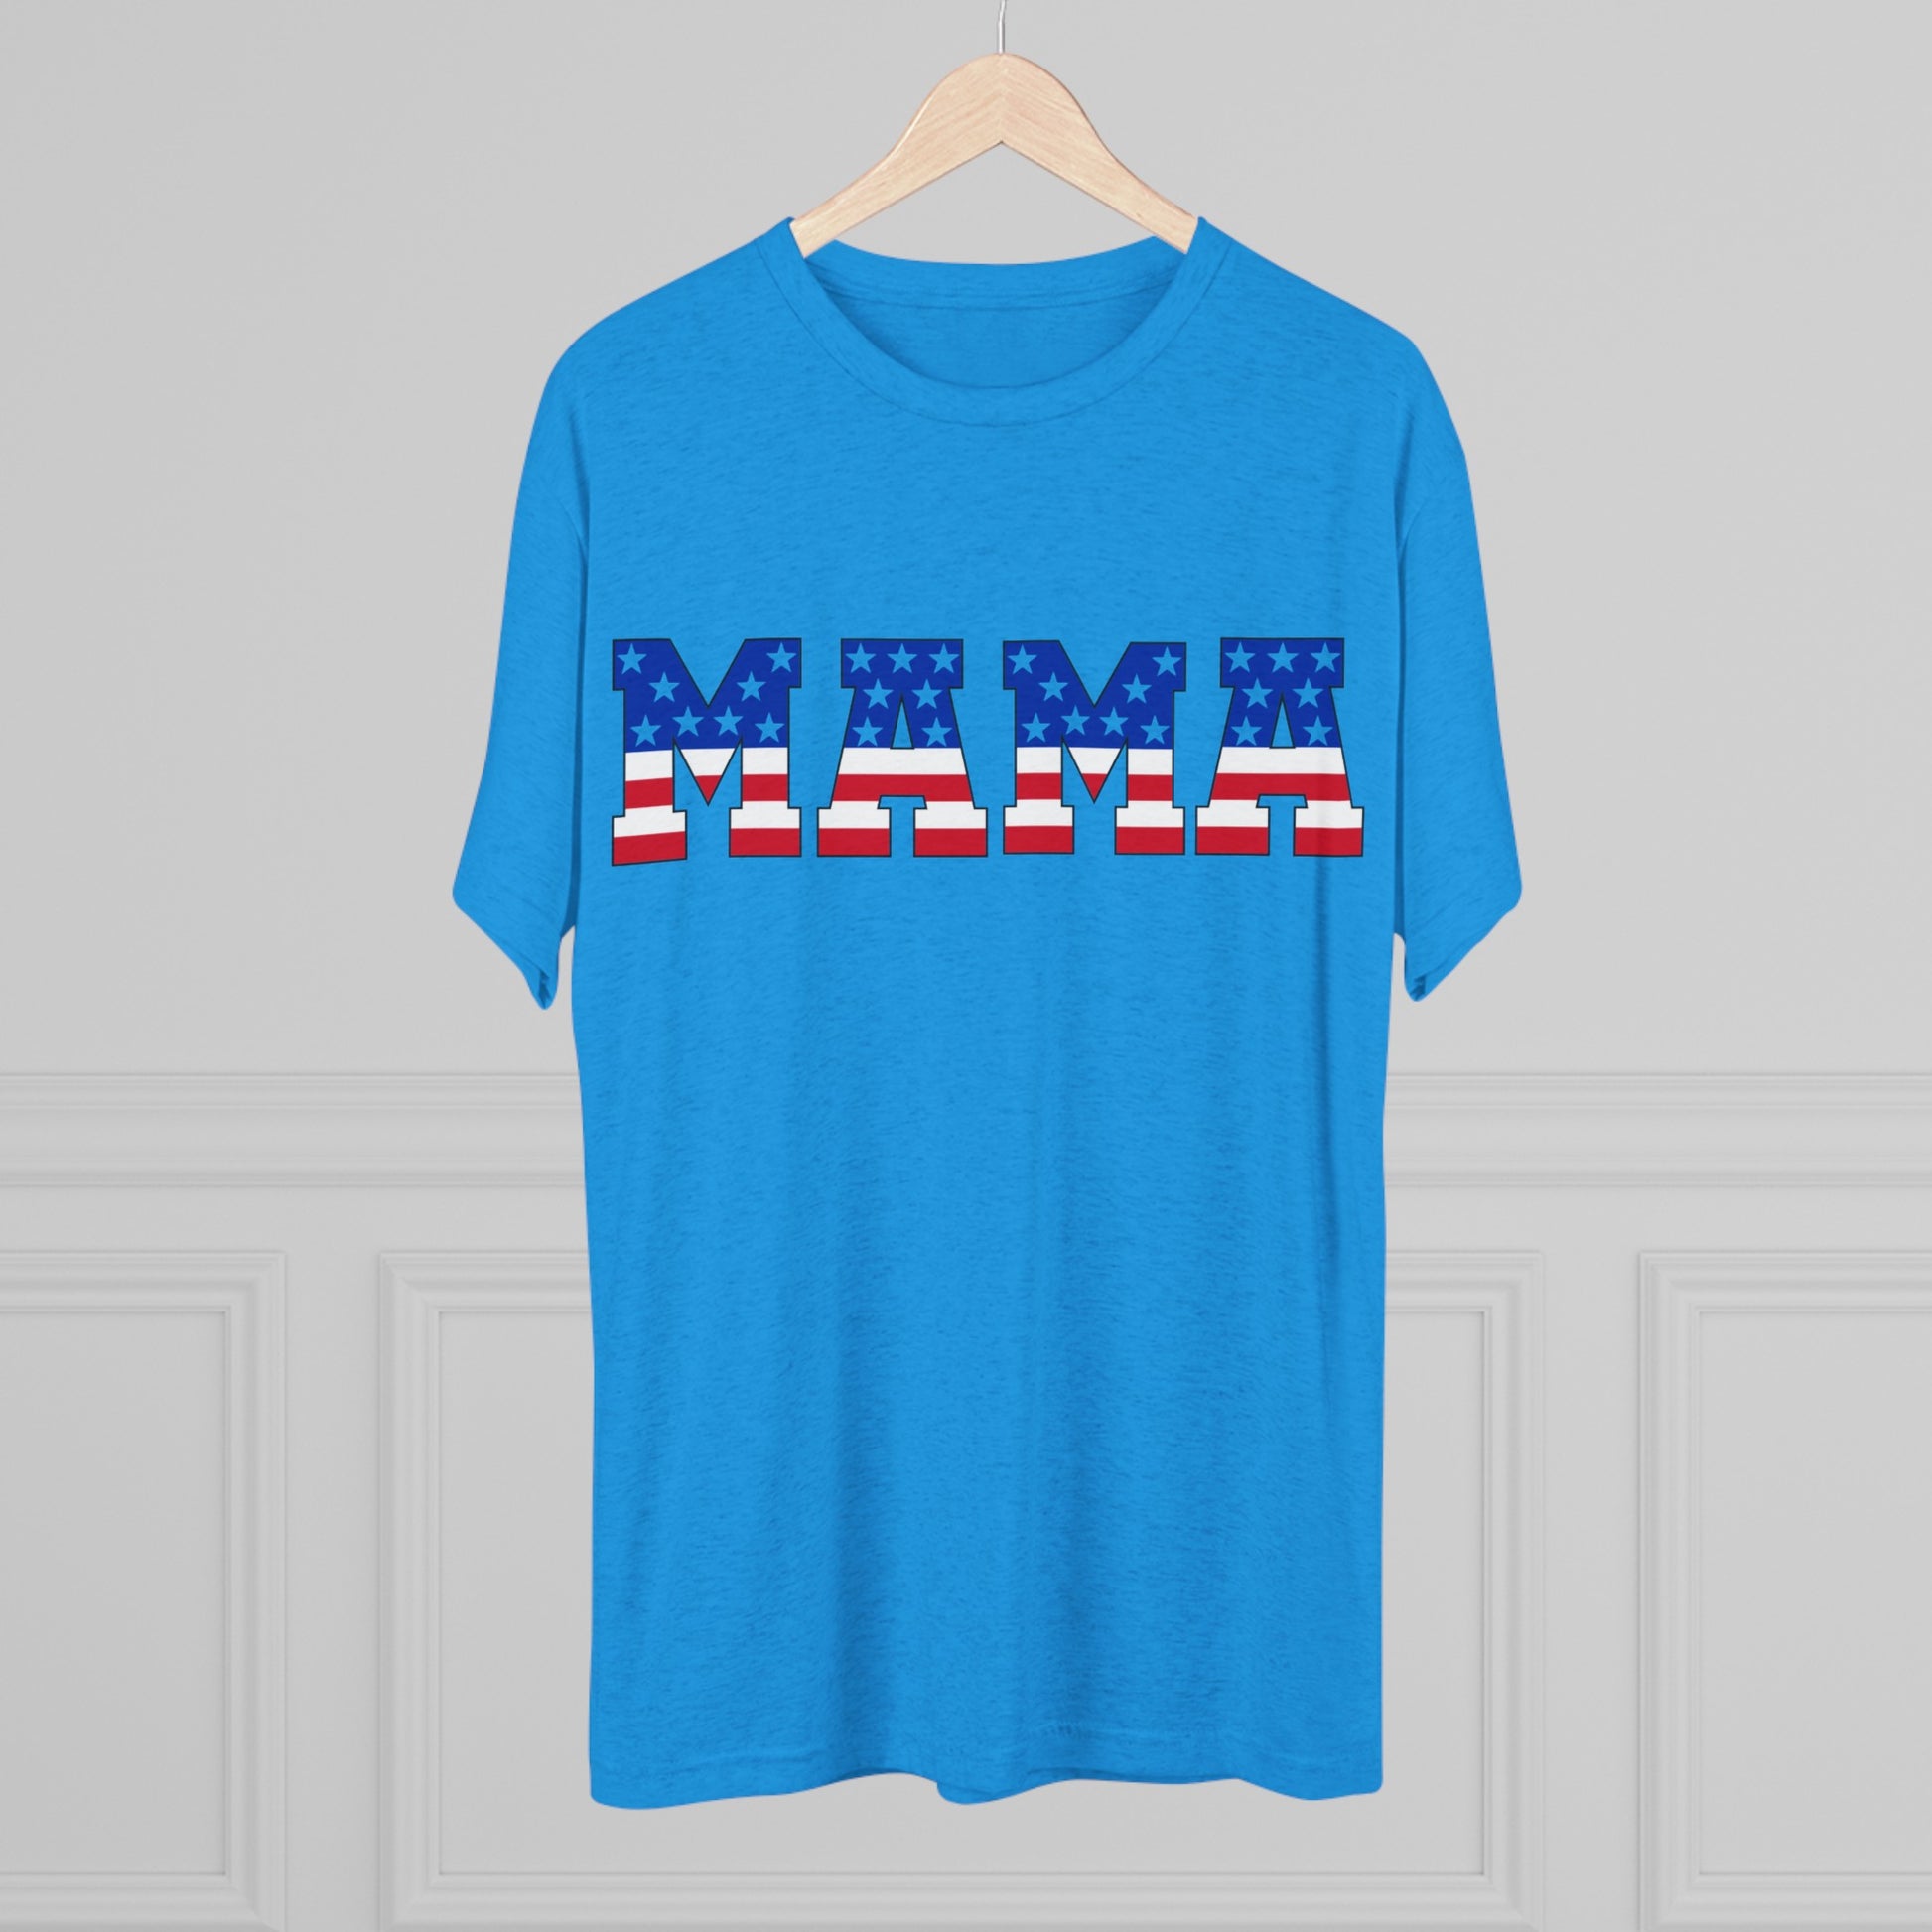 Get trendy with Patriotic Mama Tri-Blend Crew Tee - T-Shirt available at Good Gift Company. Grab yours for $18.96 today!